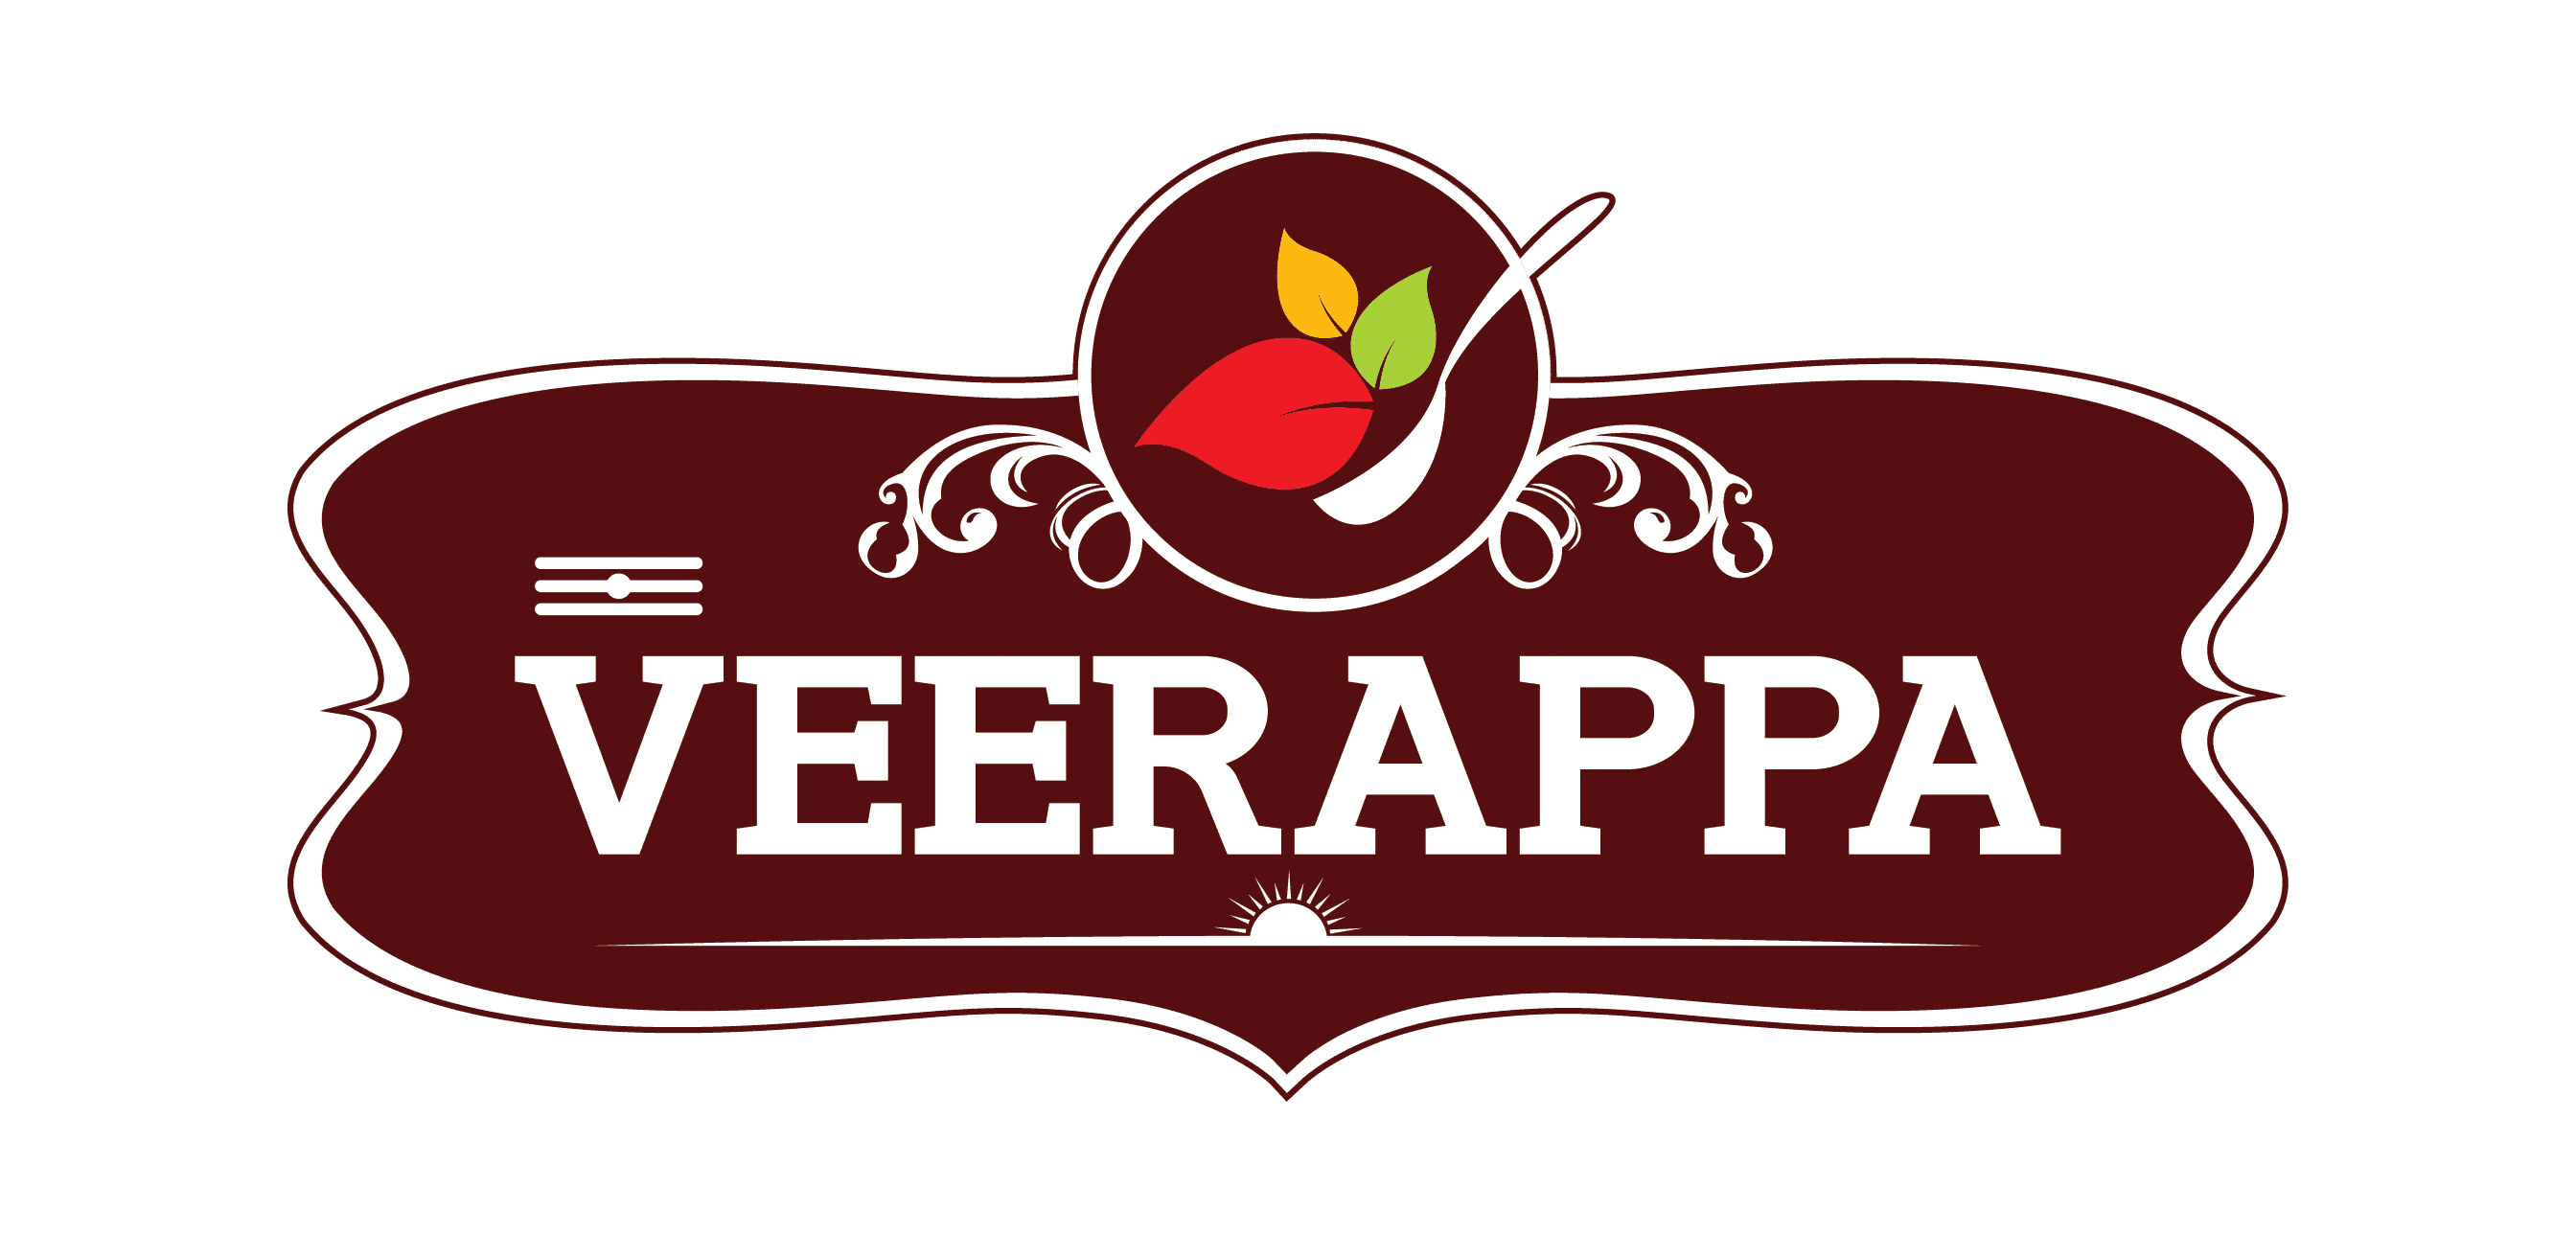 Veerappa Foods and Spices